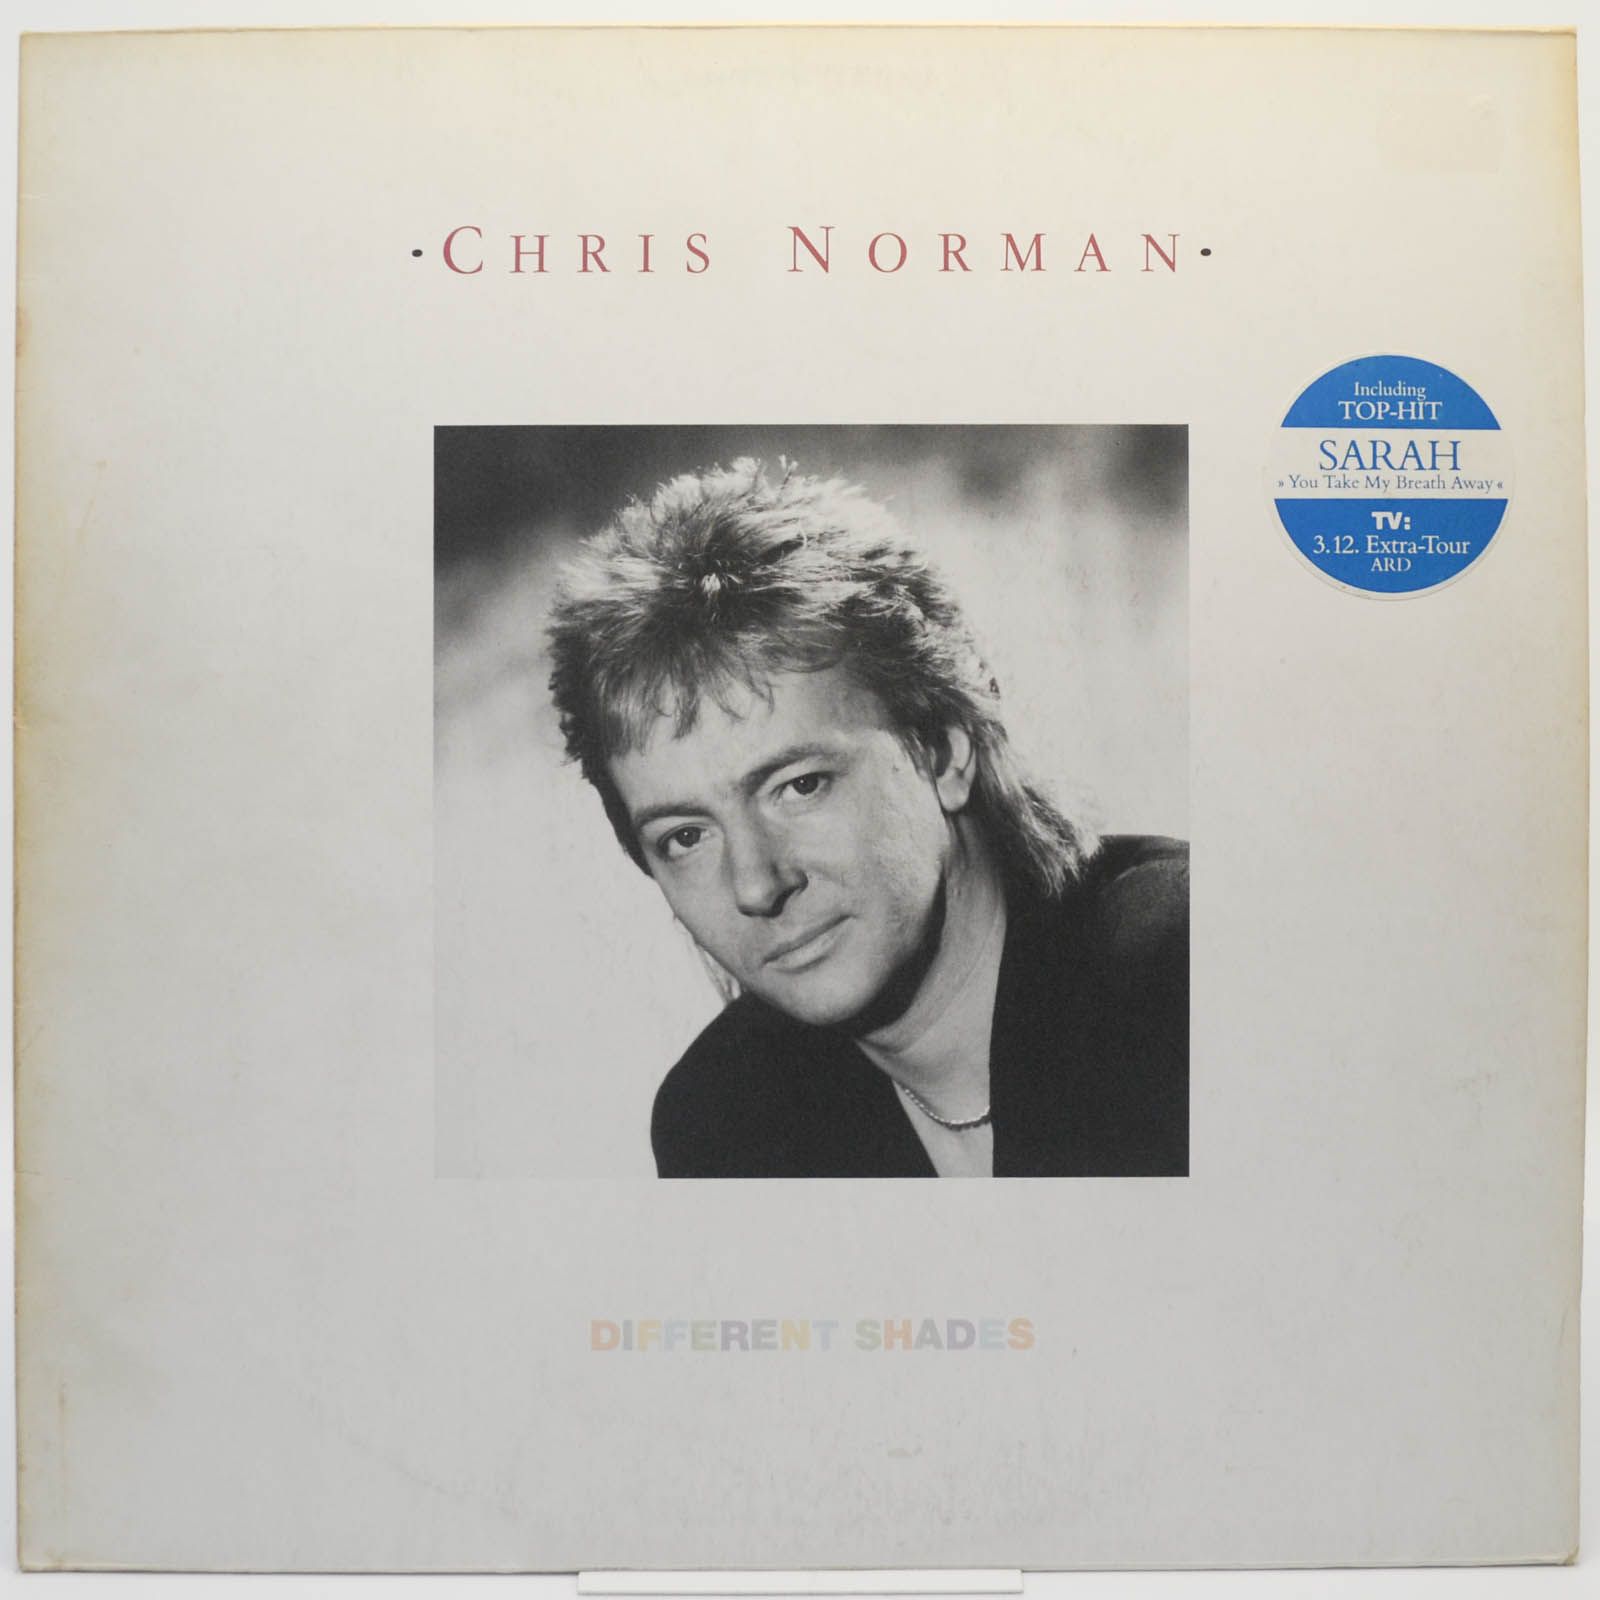 Chris Norman — Different Shades, 1987